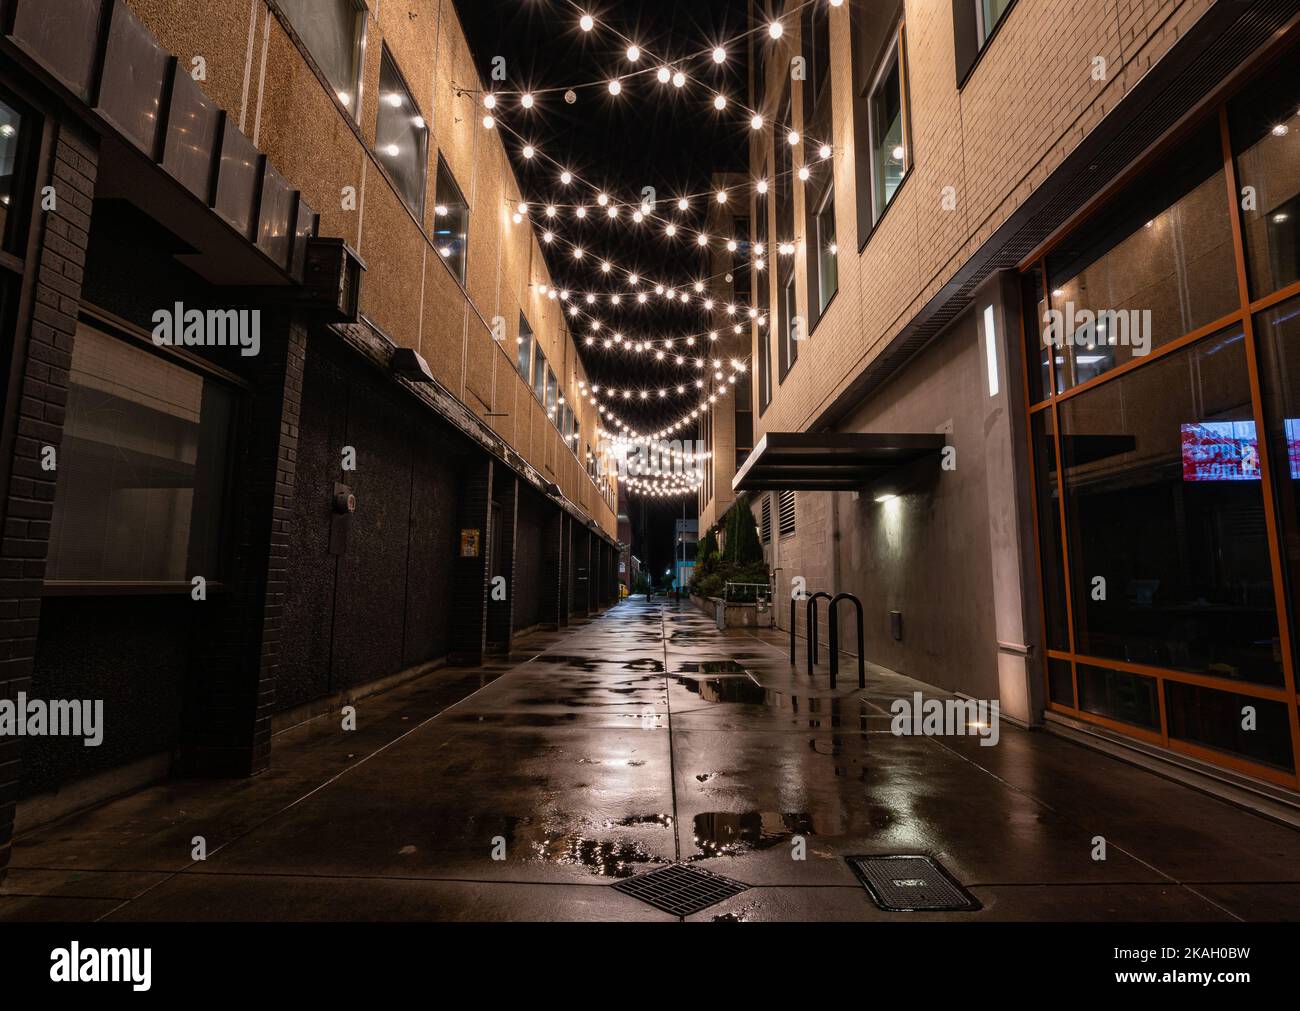 An empty alley topped with strings of lights in Eugene, Oregon Stock Photo